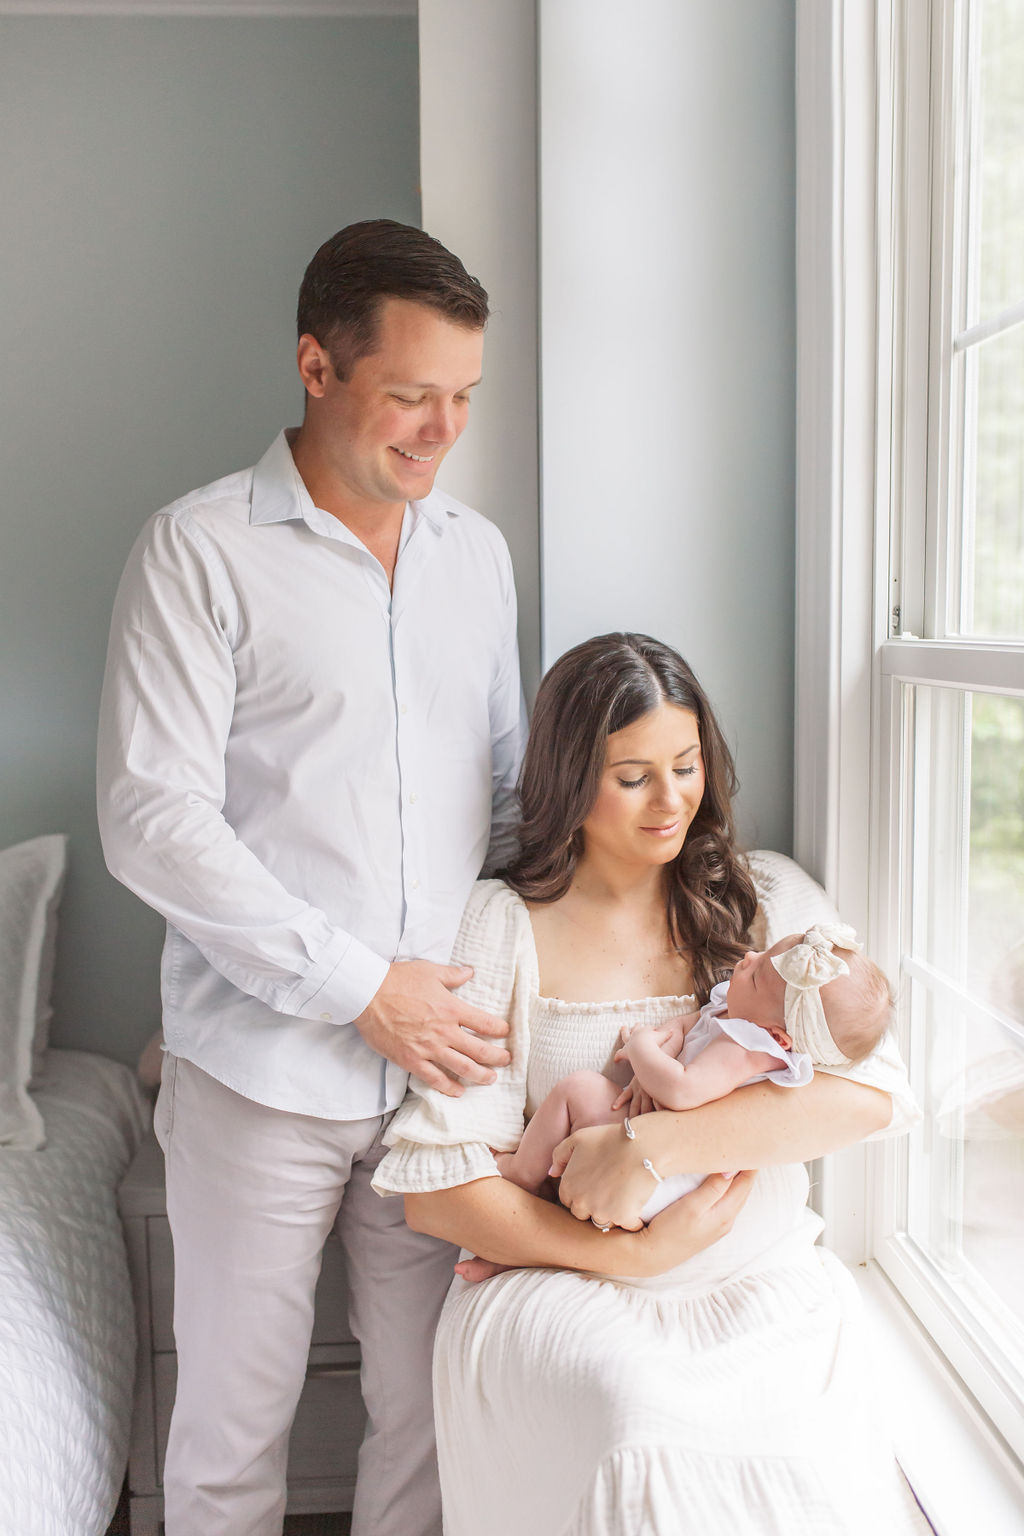 A husband and wife hold their newborn daughter and sit by a window during their newborn photos.